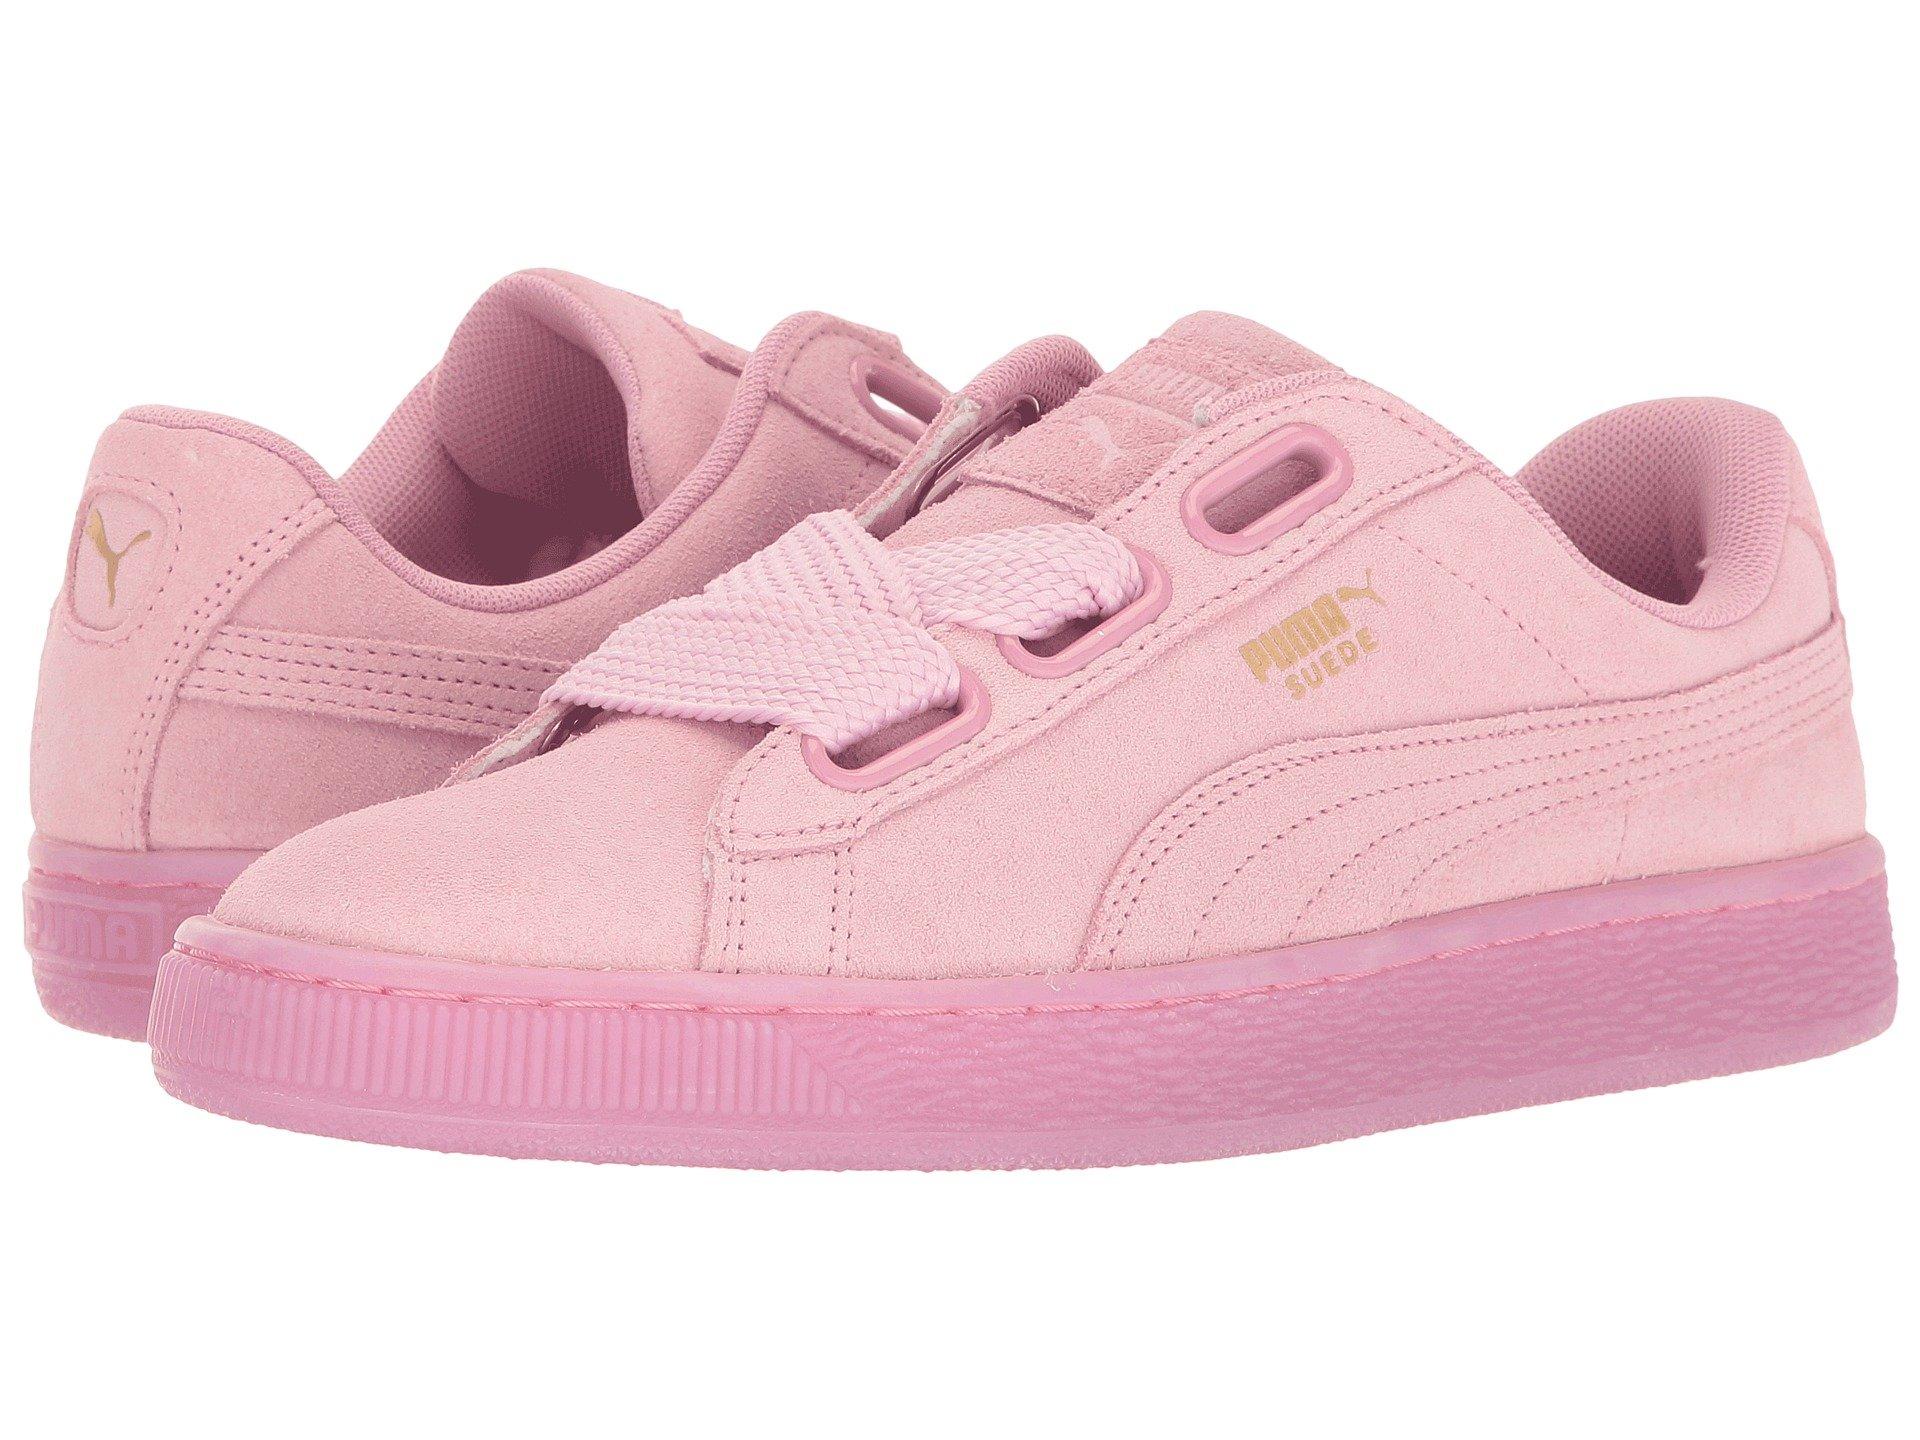 Puma Suede Heart Reset In Prism Pink/prism Pink | ModeSens